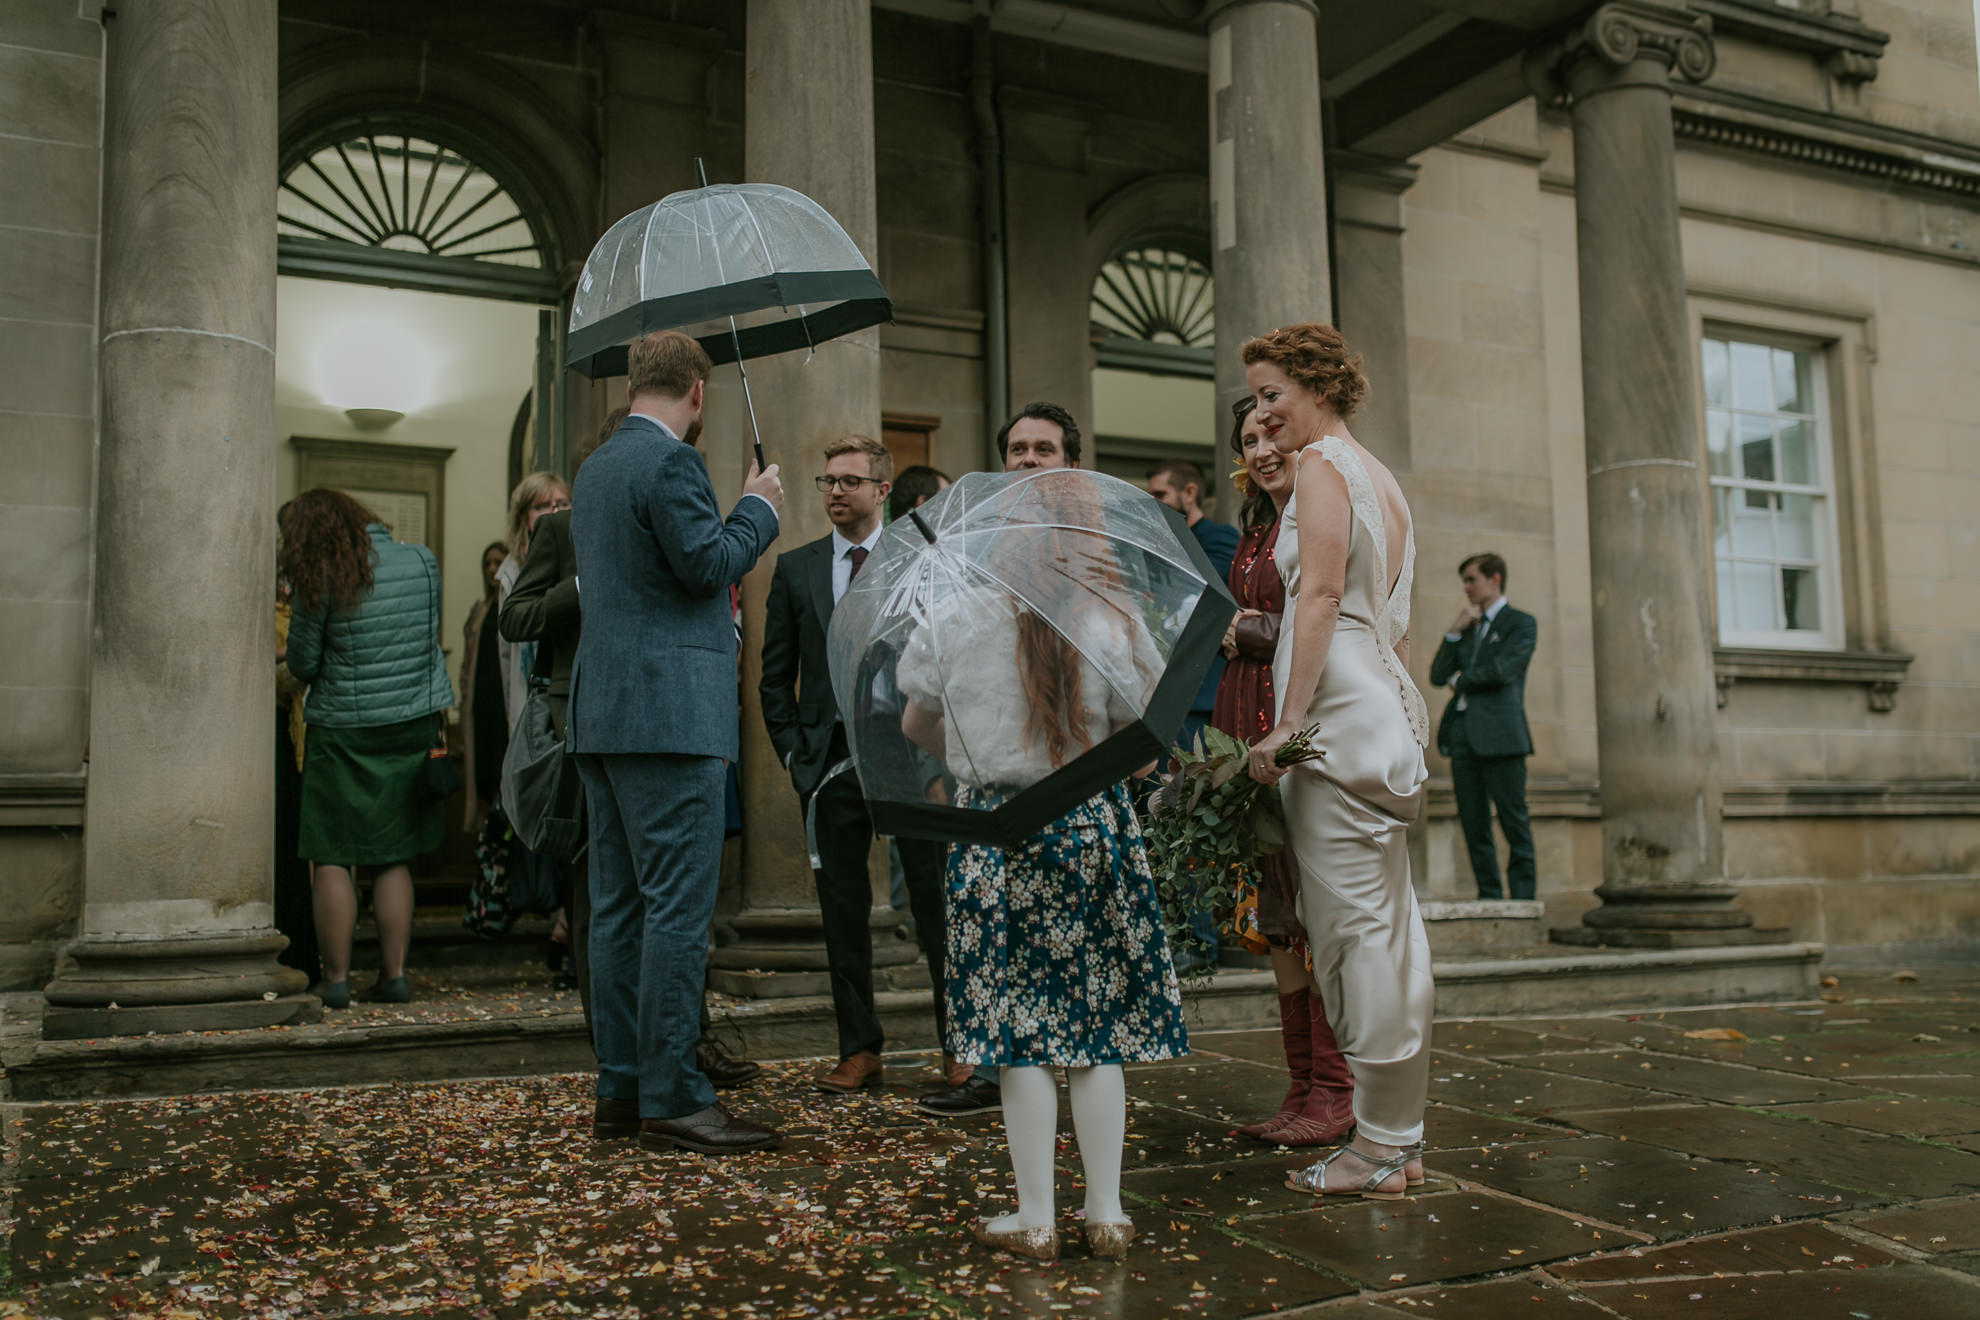 Bride and groom talking to a young girl outside on a rainy day